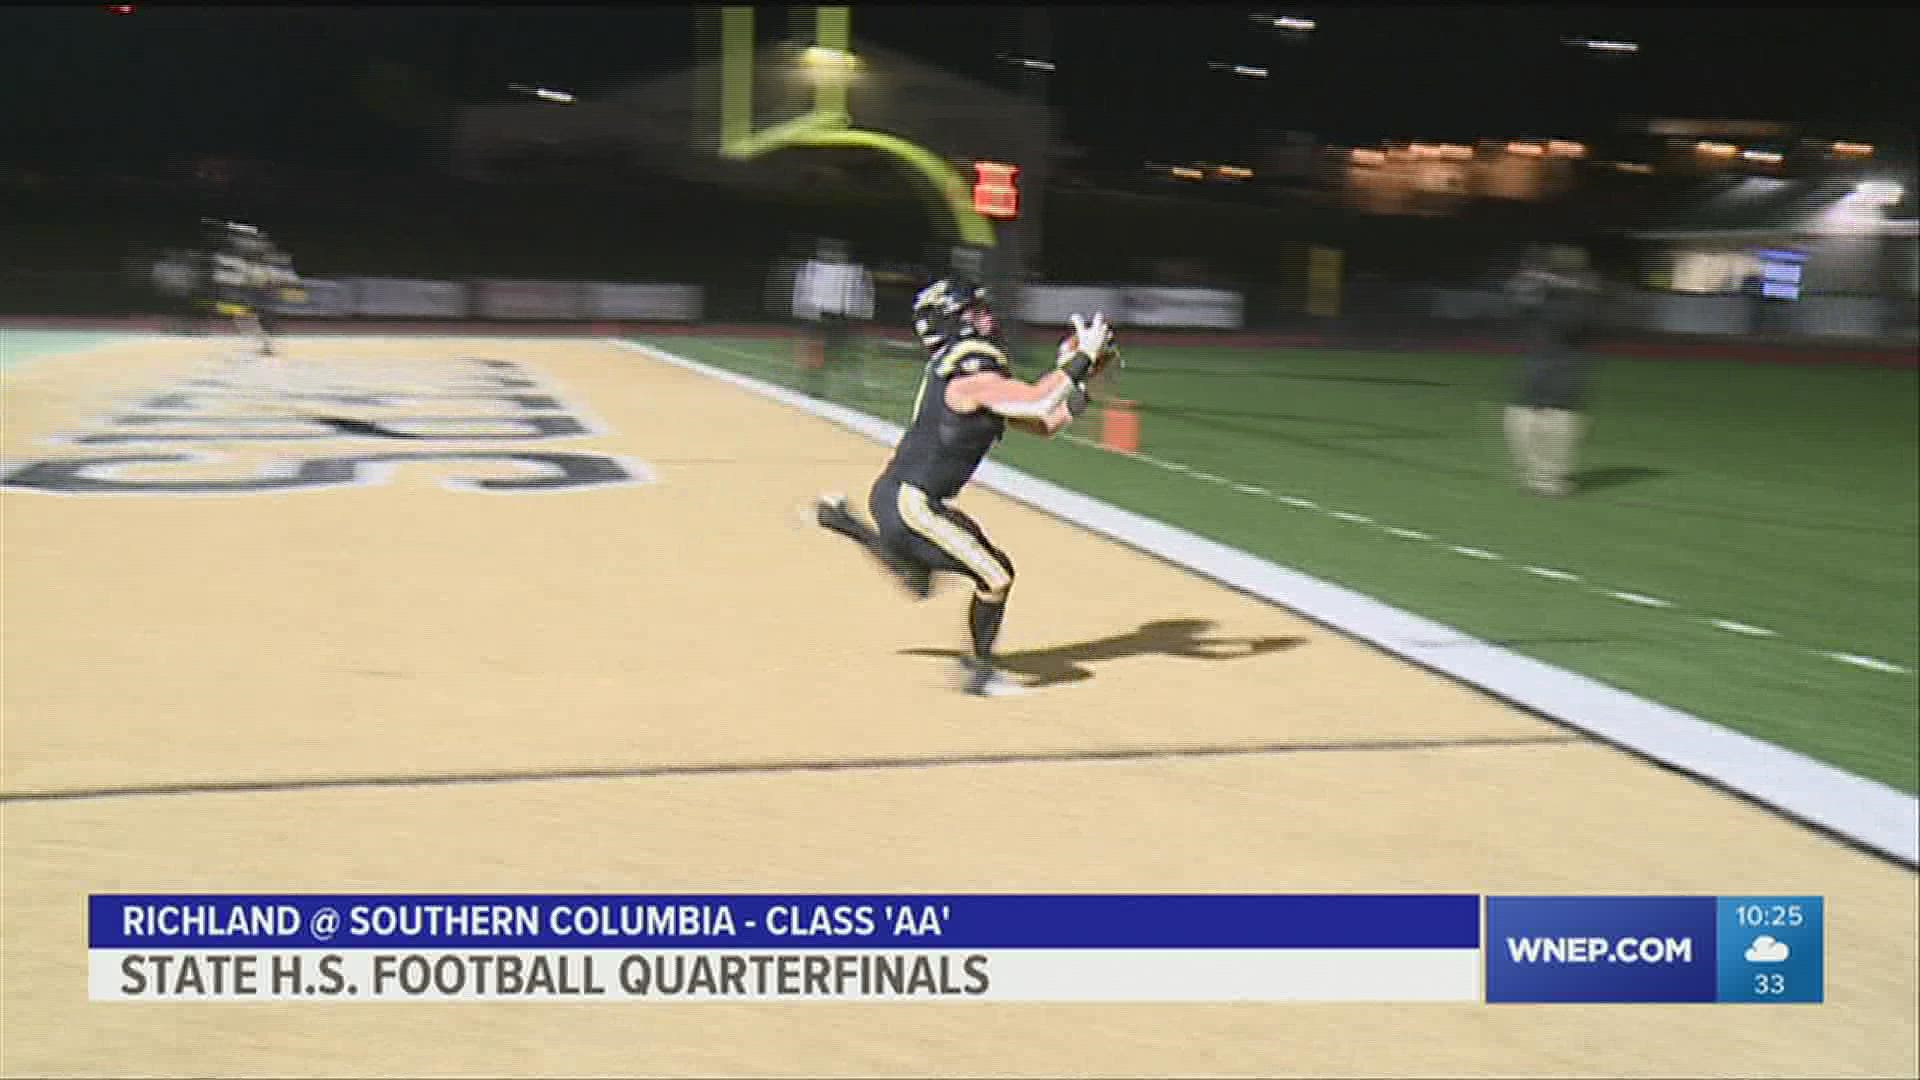 Southern Columbia destroys, 62-20, Richland to advance to the 'AA' semi-finals.